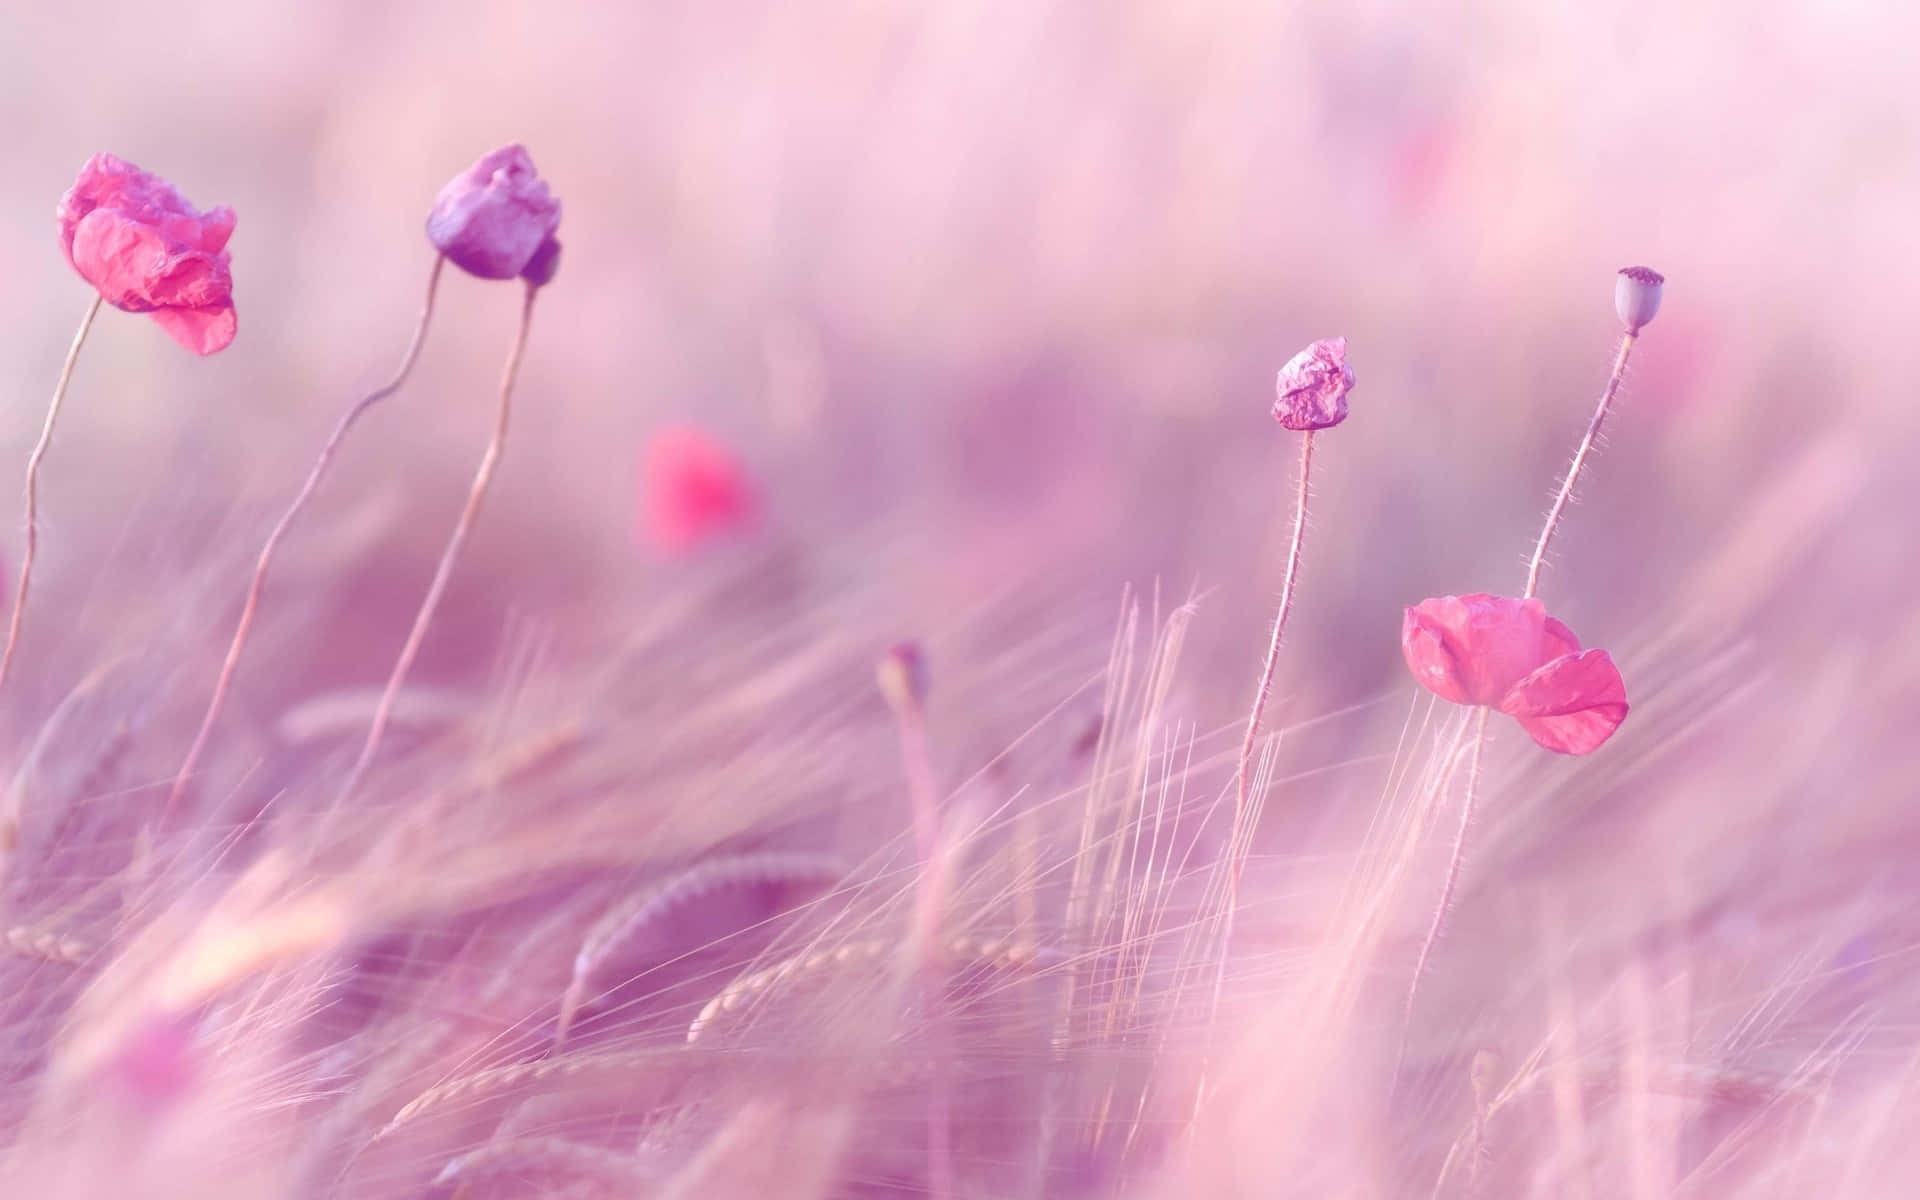 Blurred Shades Of Pink and Purple